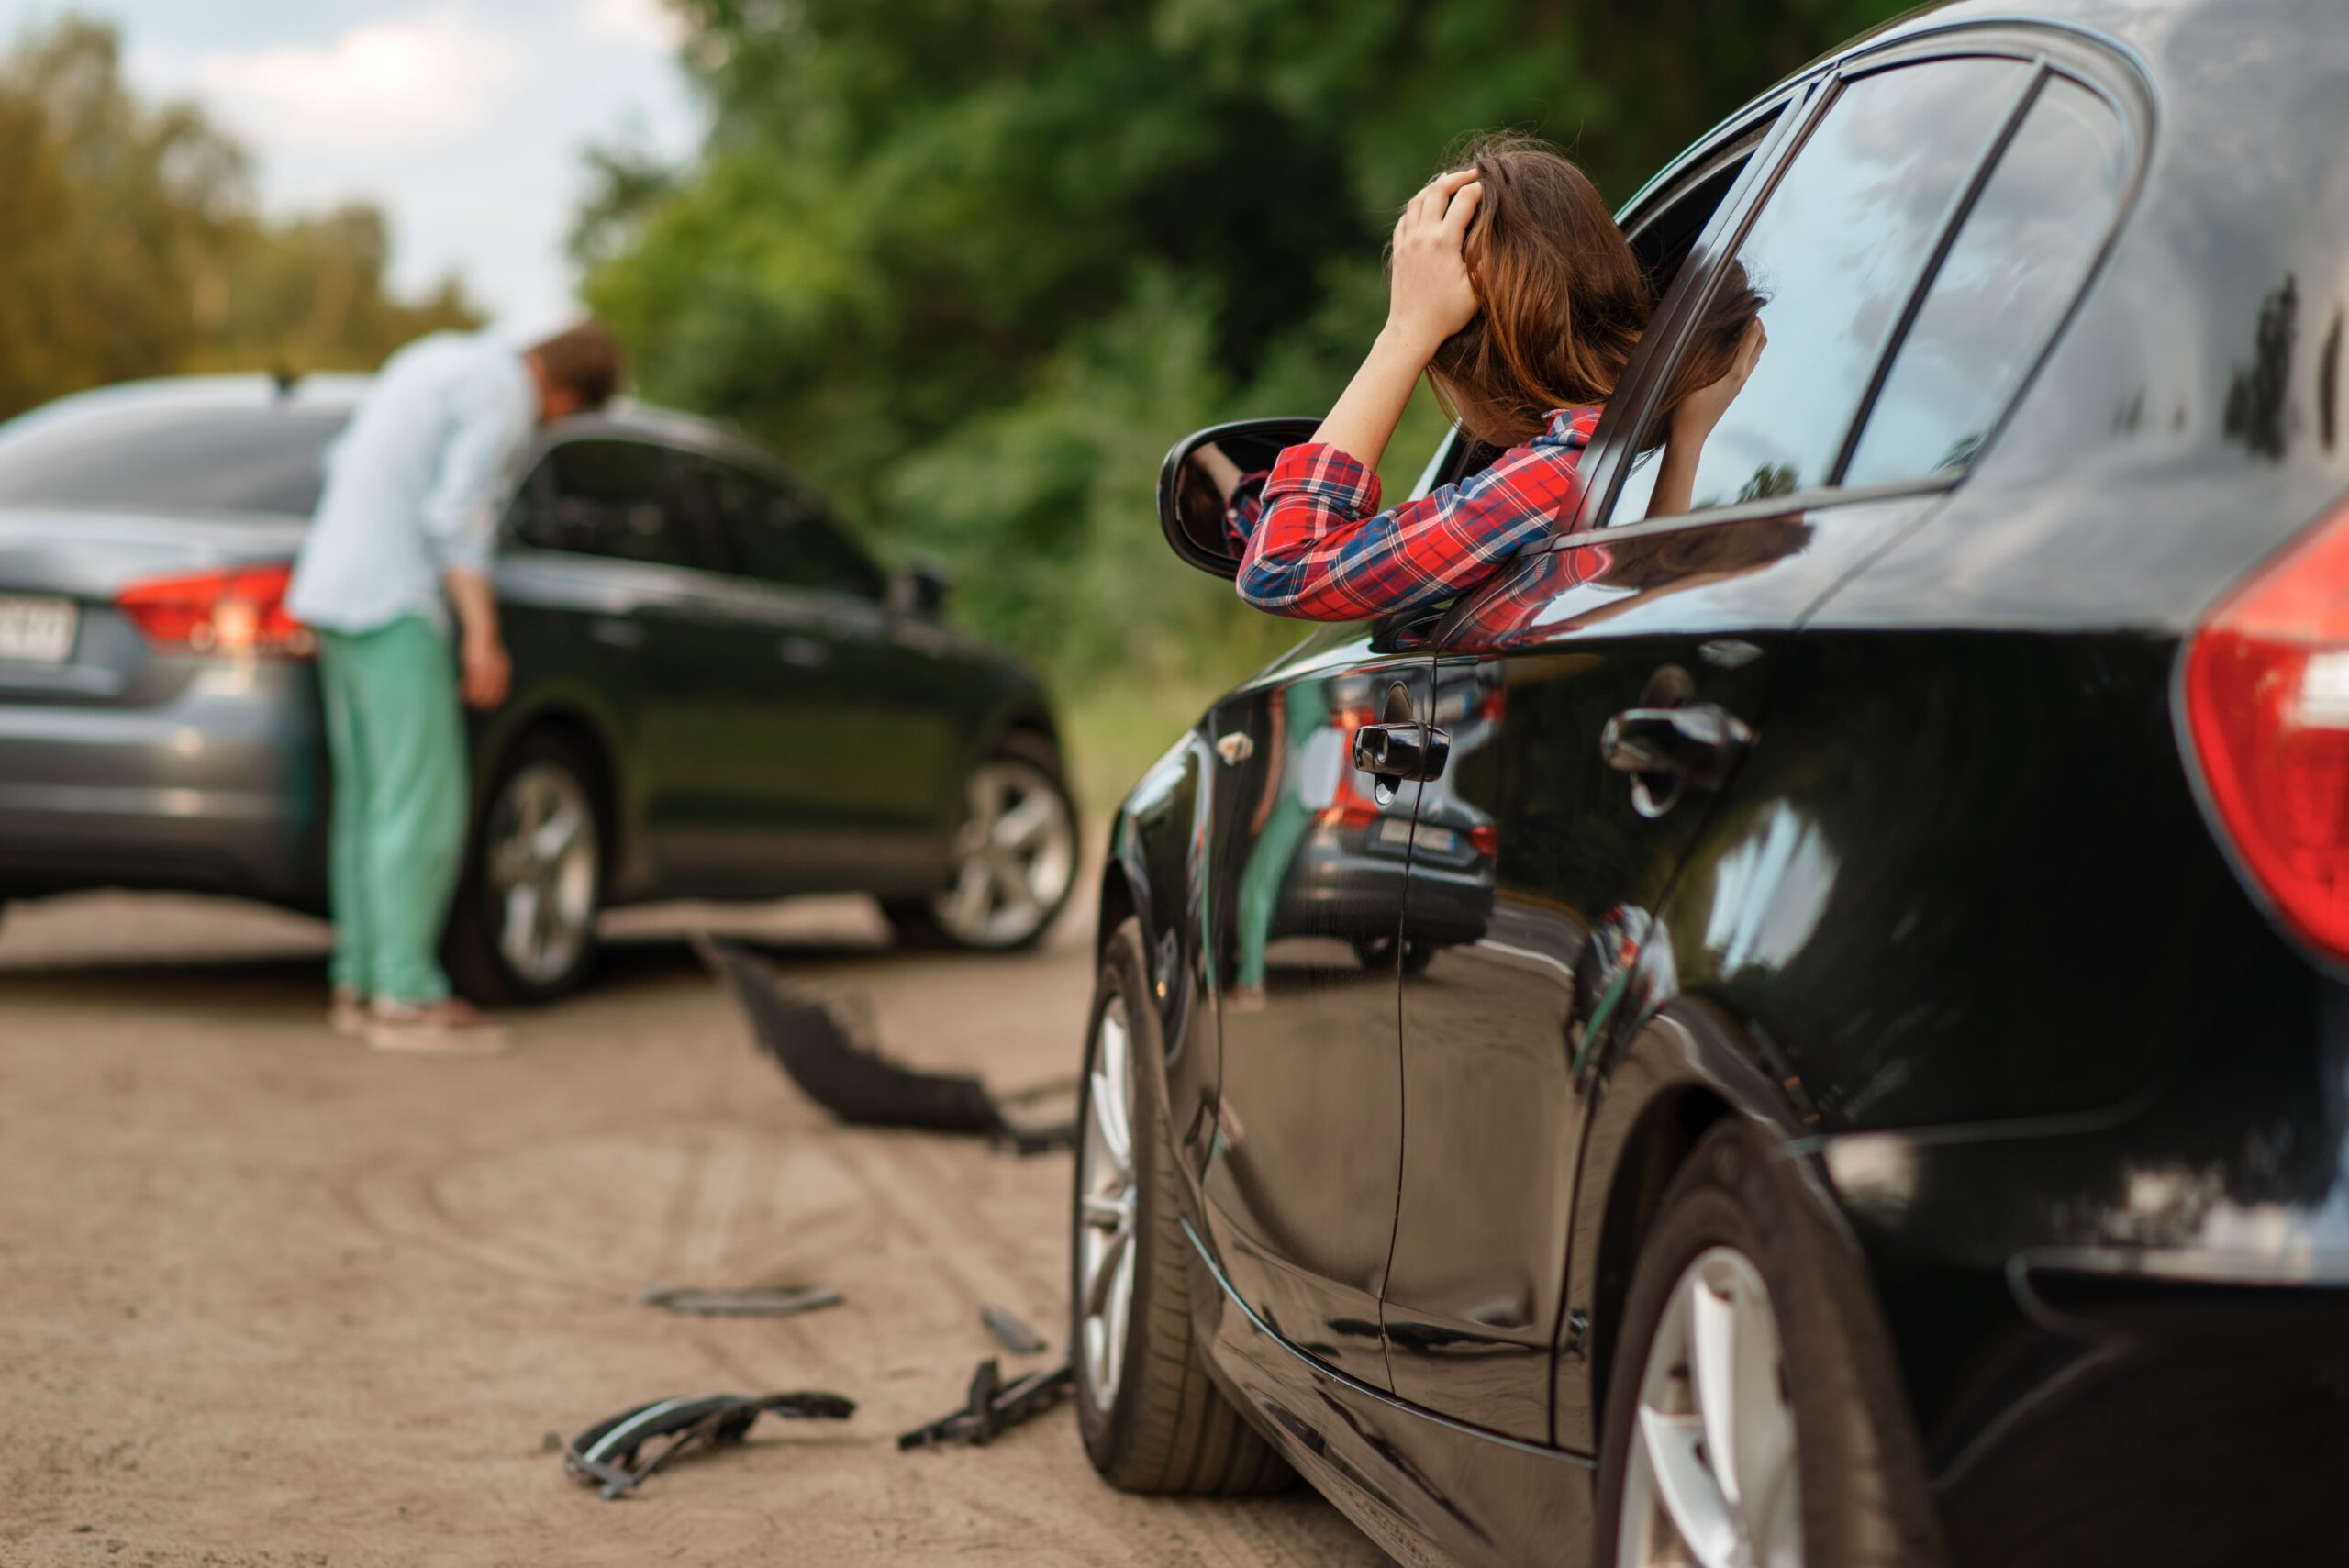 10 Common Car Accident Injuries You Should Know About